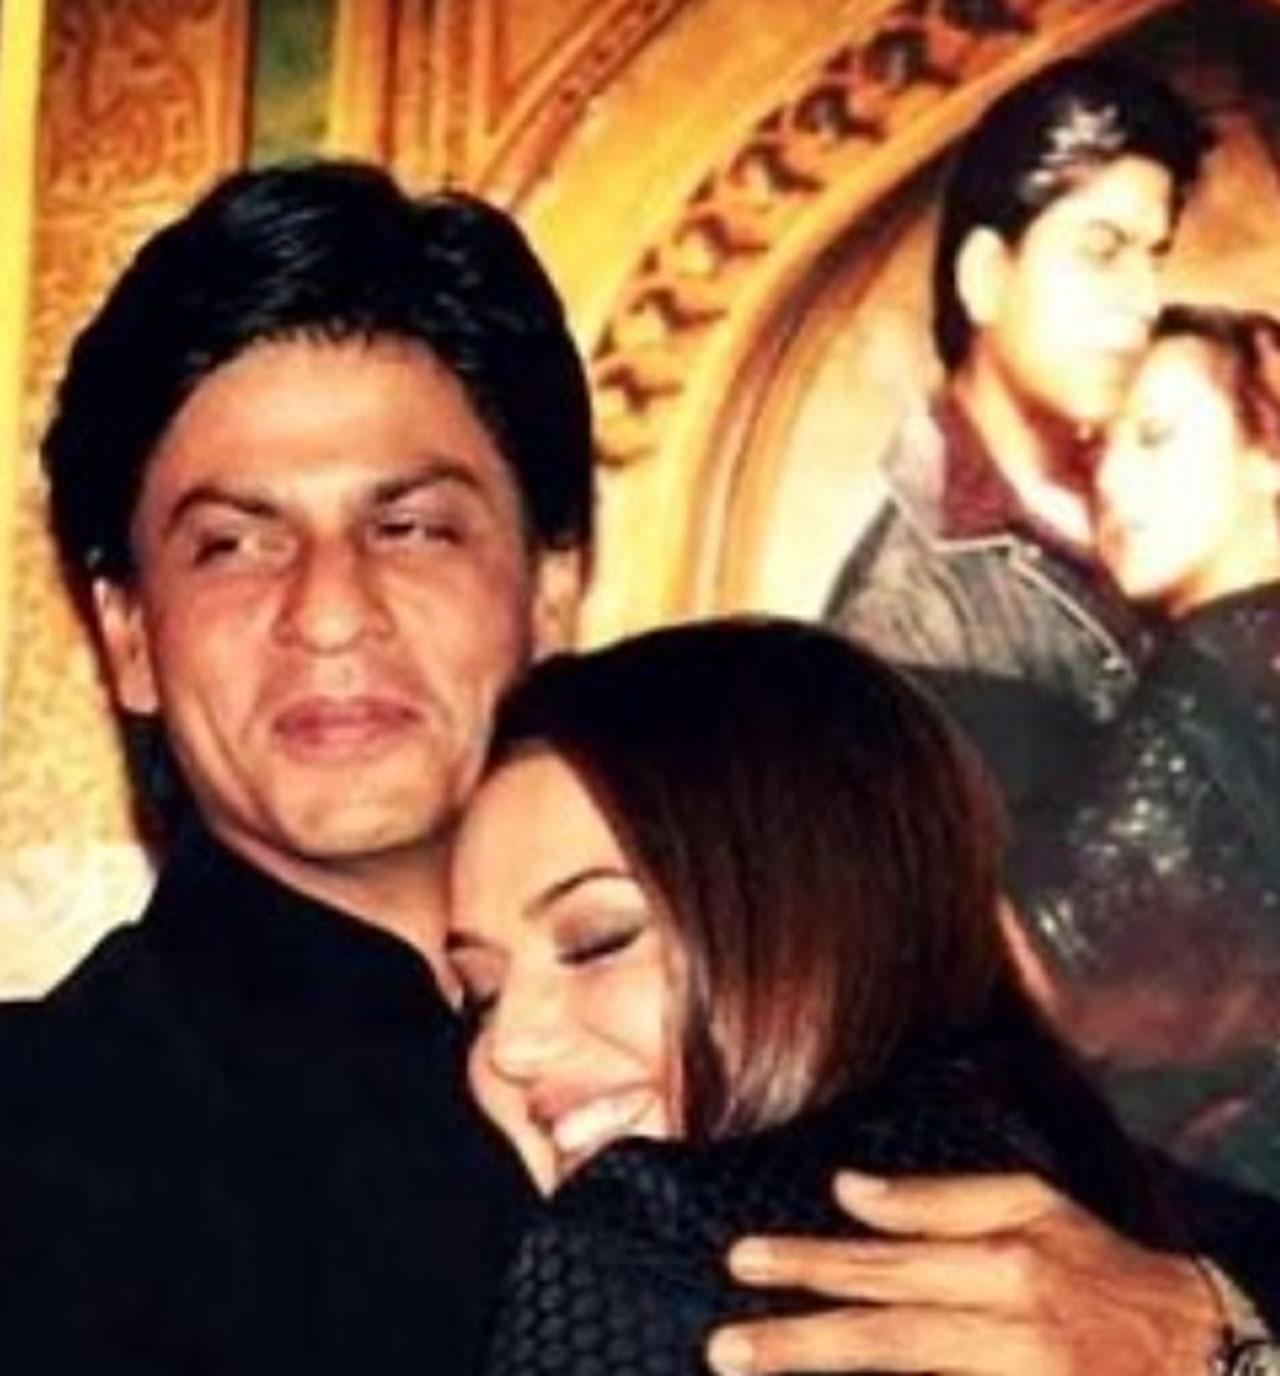 Veer and Zaara 
Yash Chopra’s cross-border romance is for the ages and so is the music. Zinta shared a tender moment with Shah Rukh Khan on his birthday along with this gorgeous picture. 